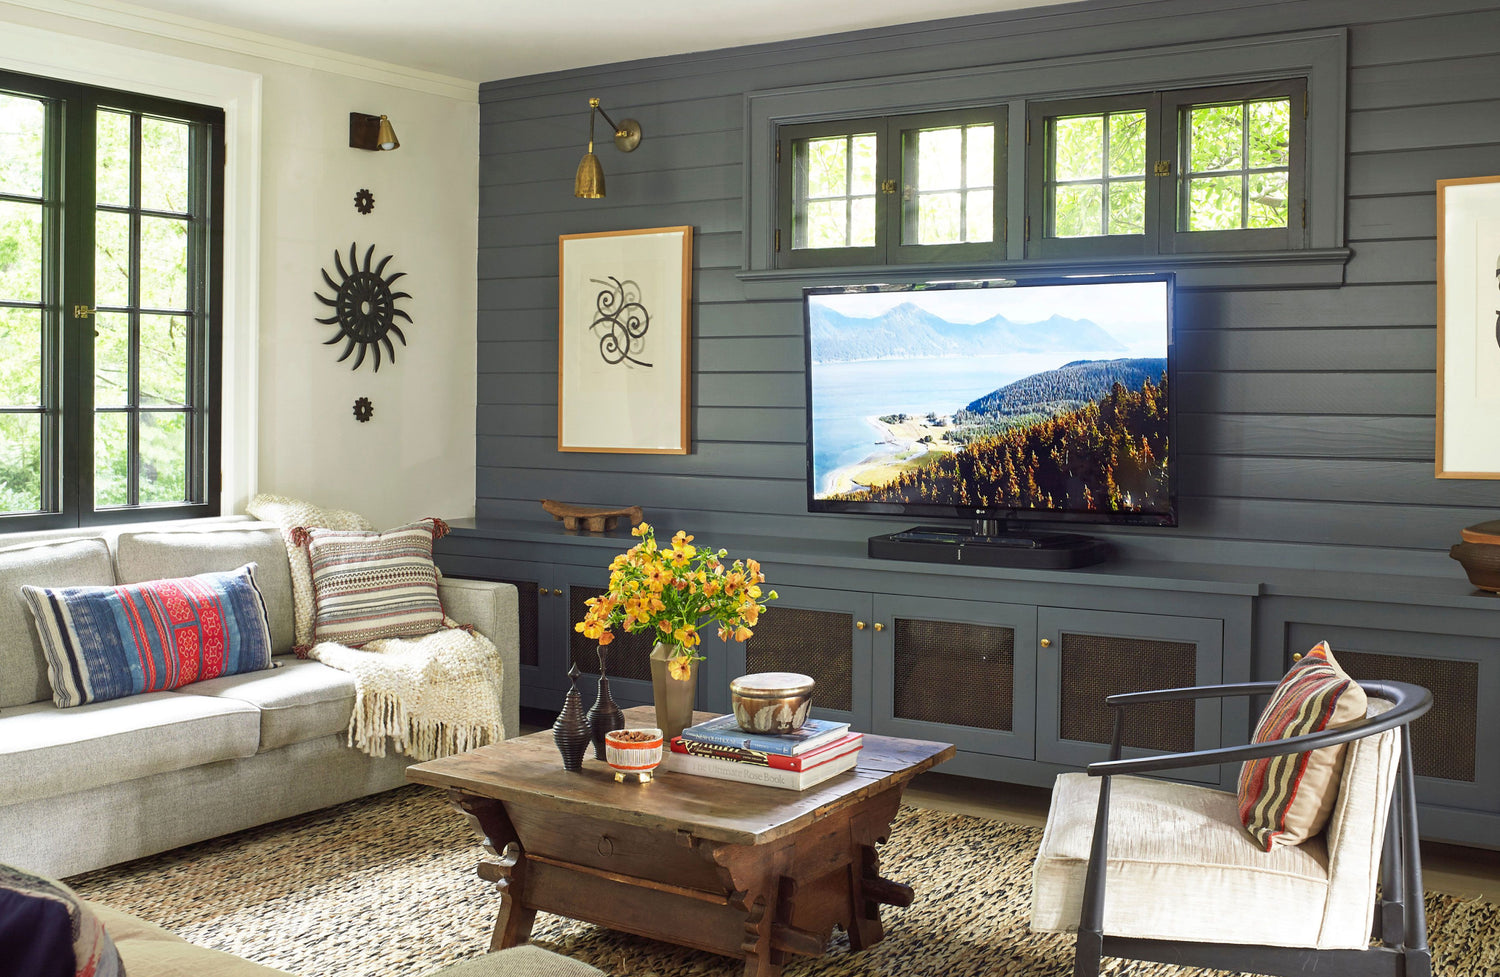 Find the Right Spot: Where to Place TV in Living Room